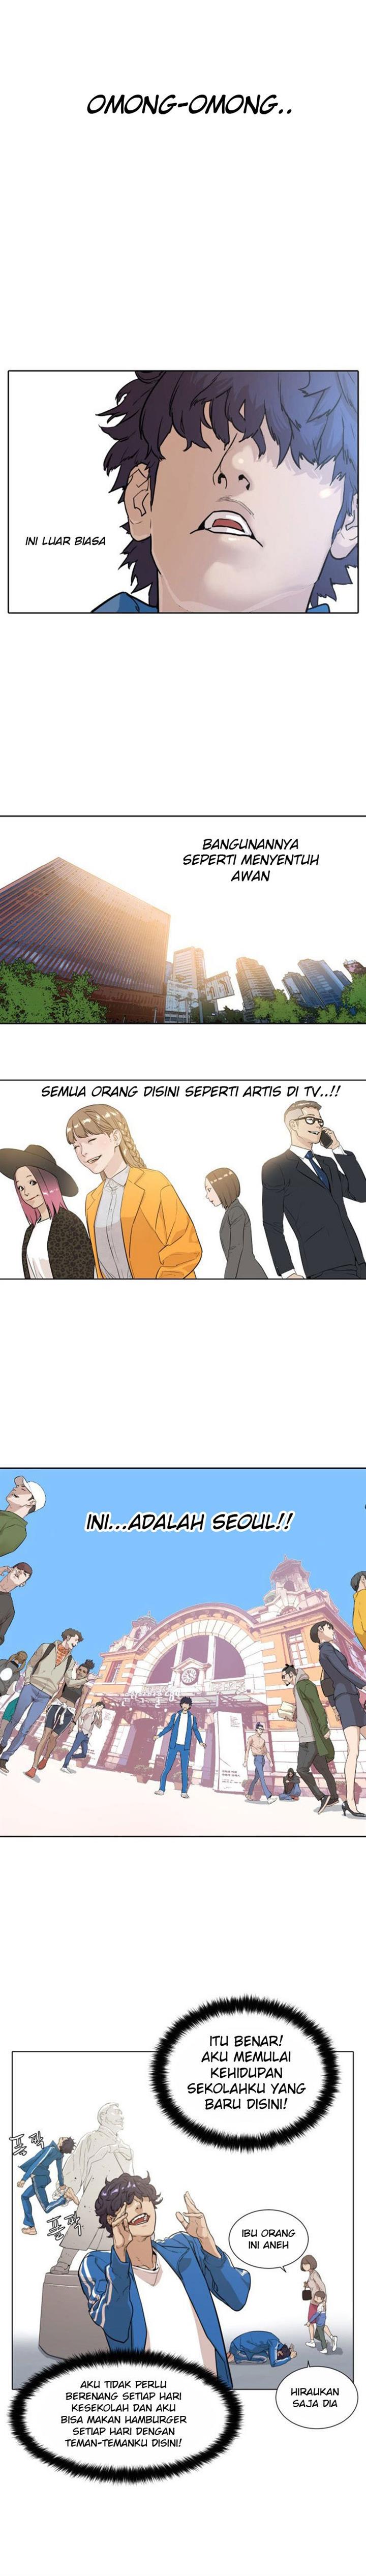 Spoiler Manhwa Find the Waves 2